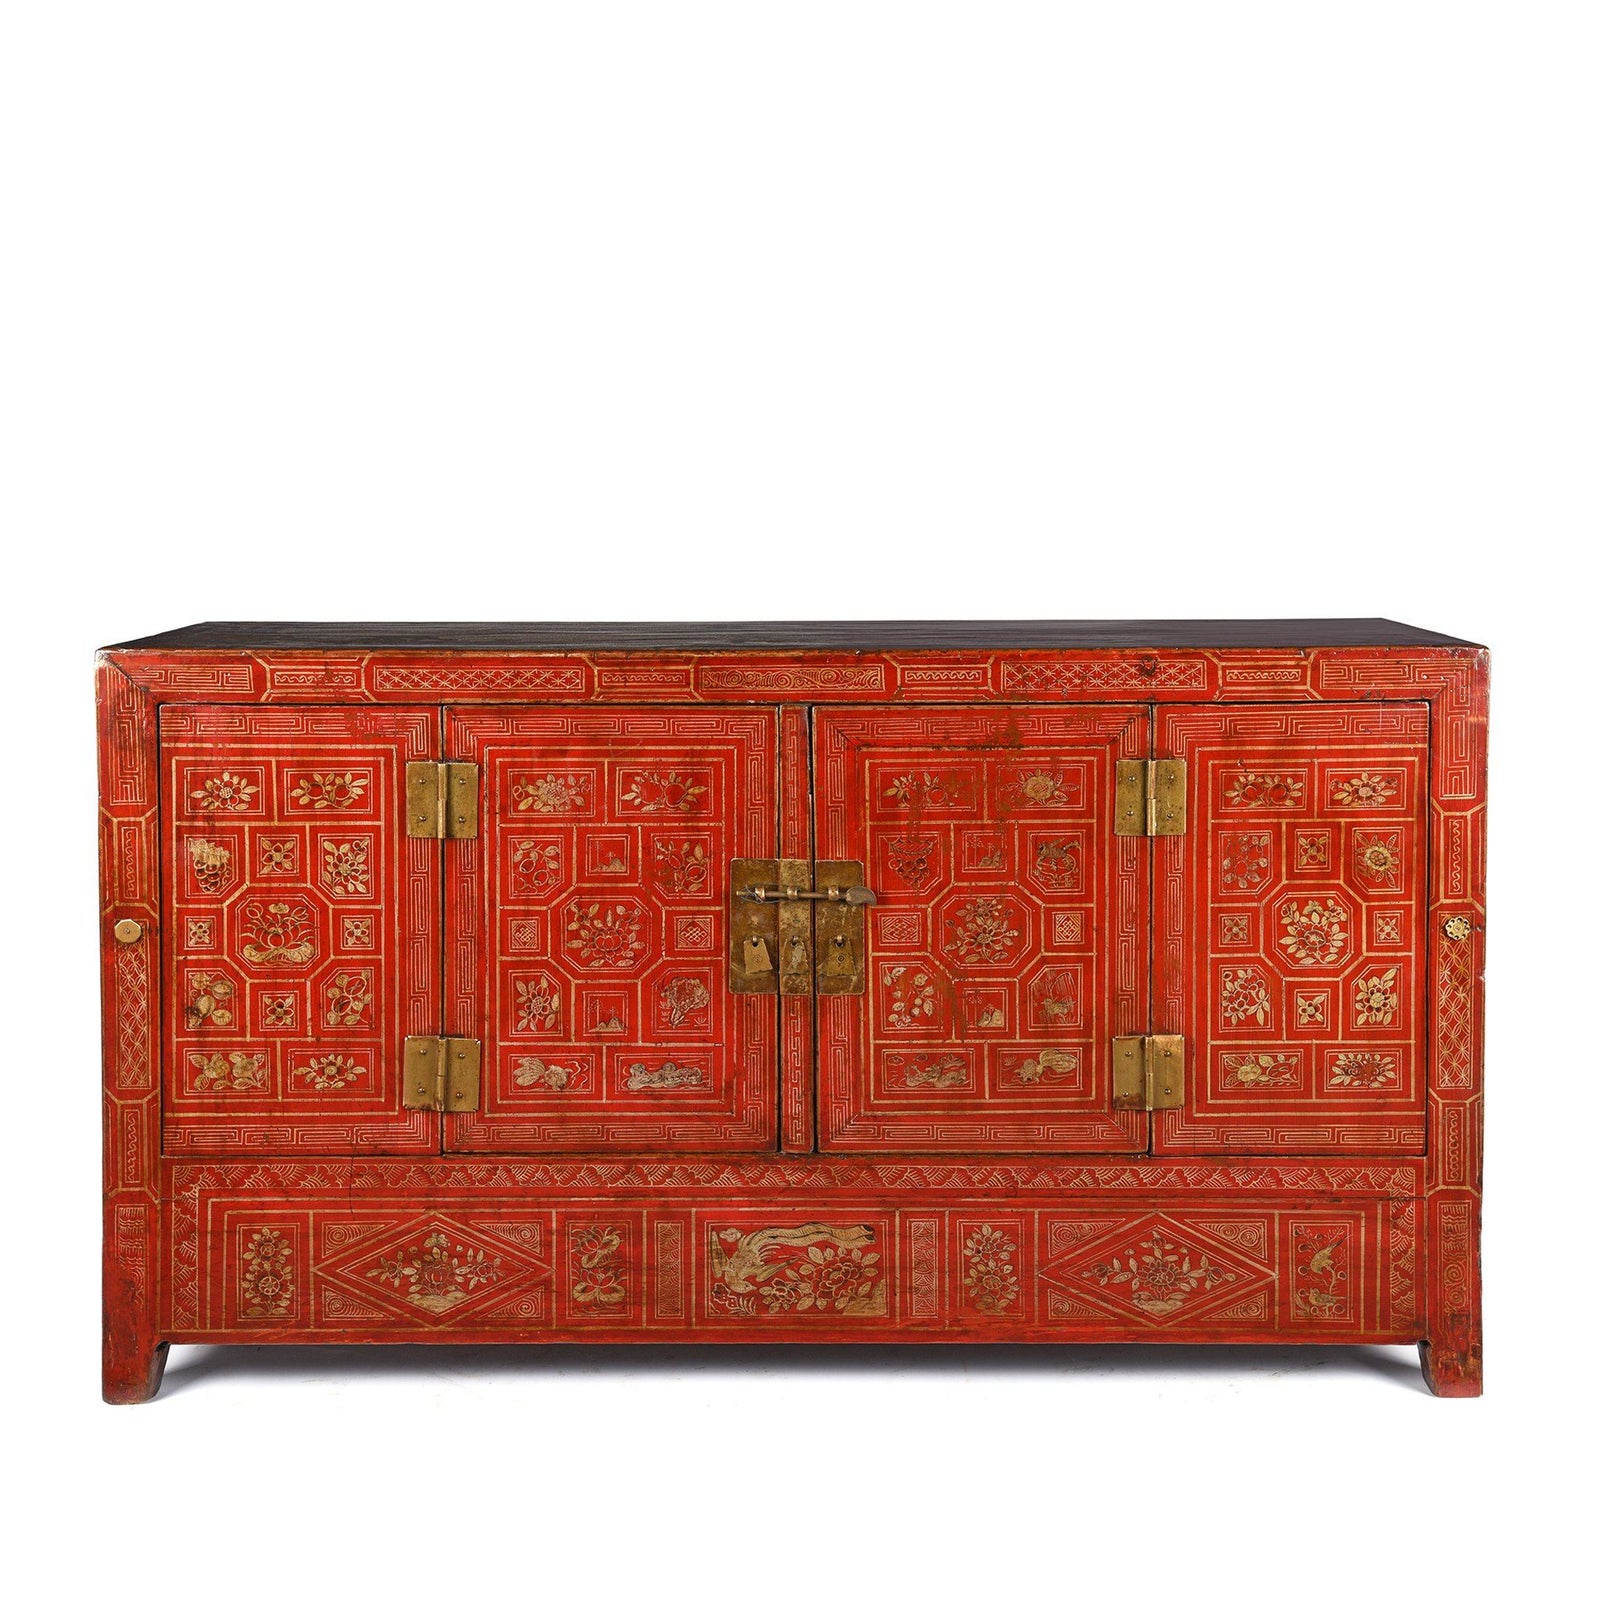 Vintage Chinese Red Lacquer Dongbei Sideboard - Early 20thC | Indigo Oriental Antiques